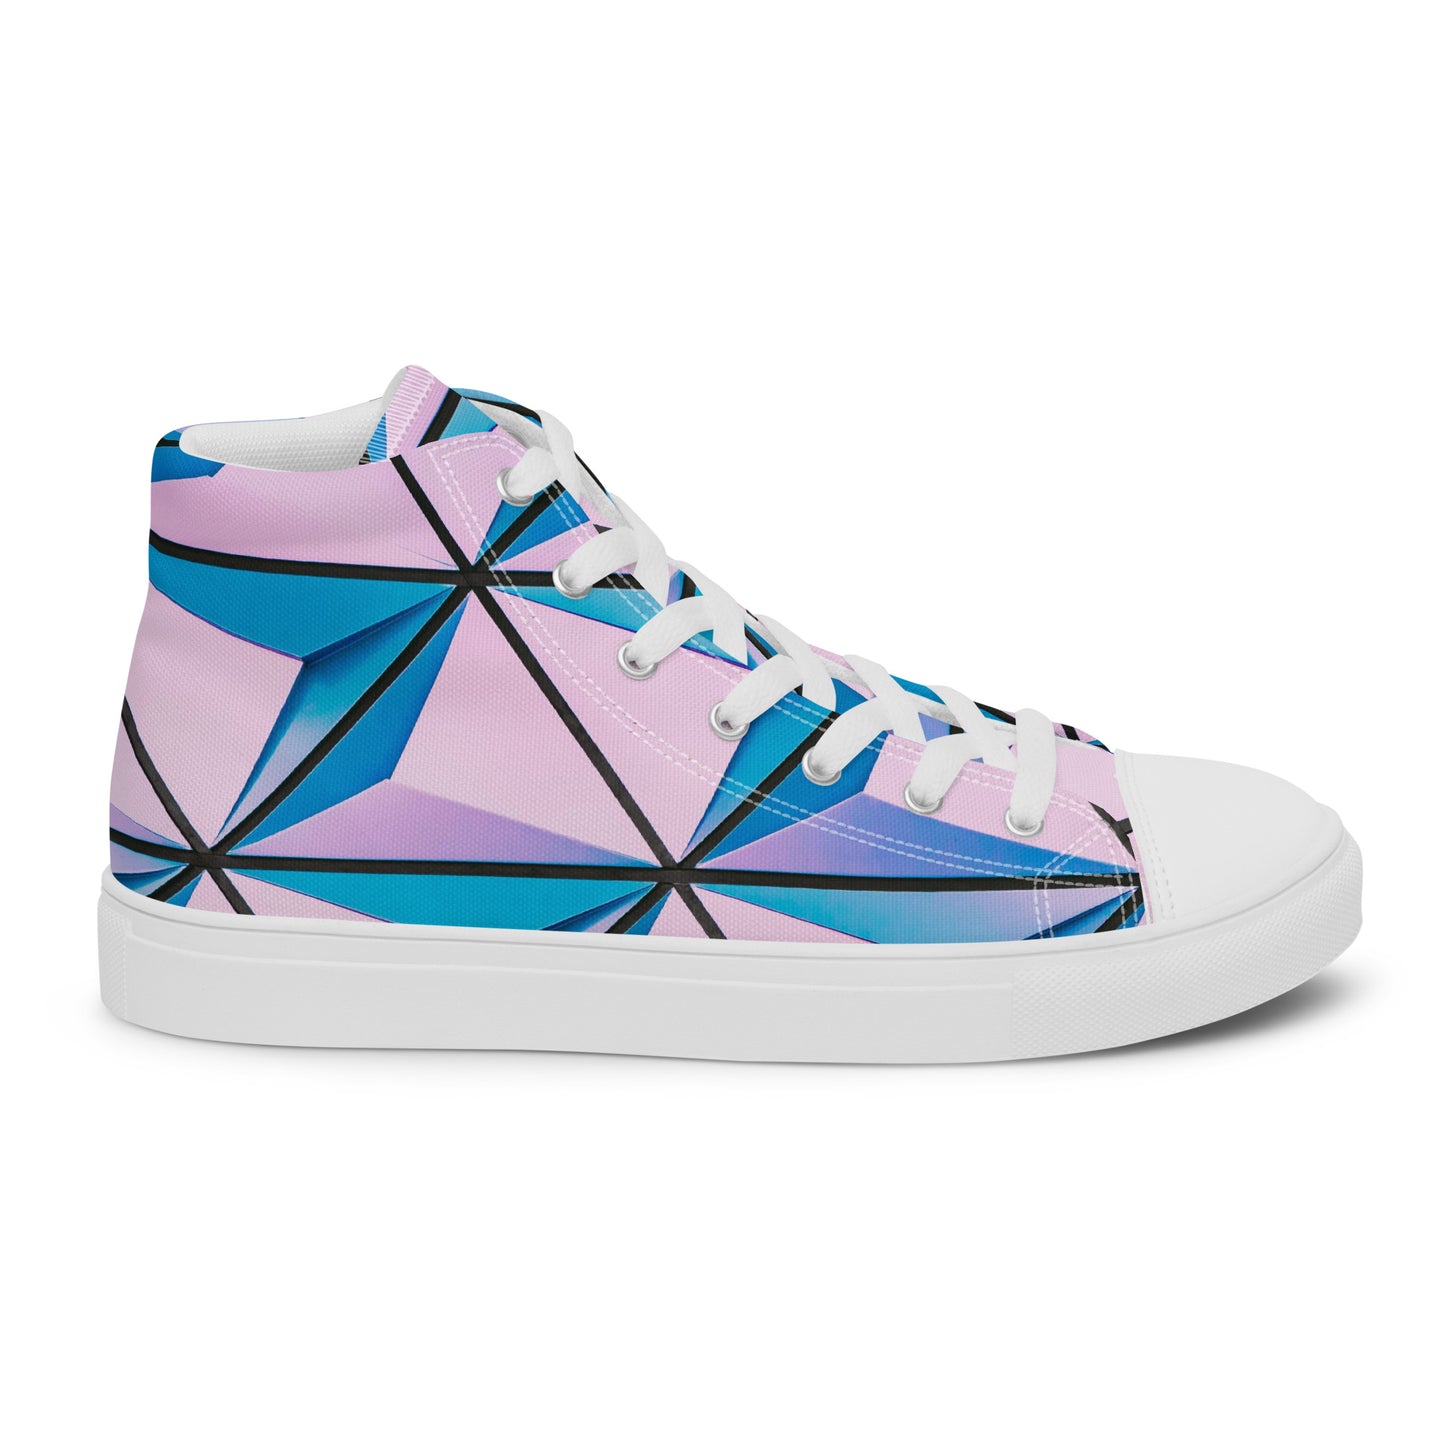 Lineage Of Angles Women's High Top Canvas Shoes